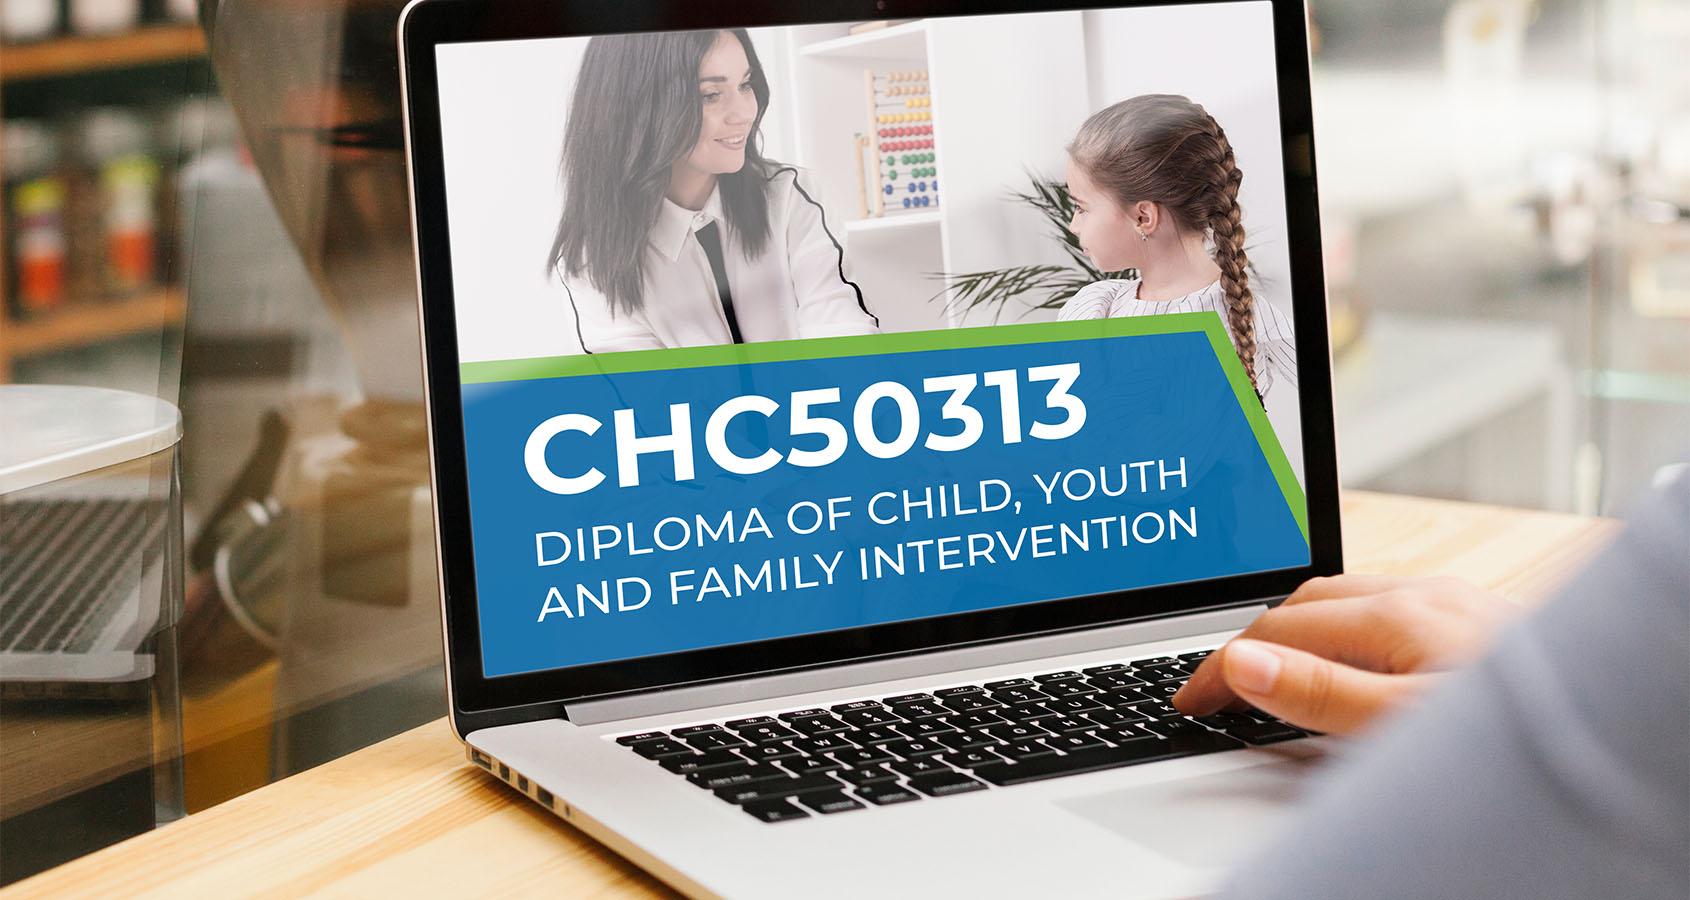 CHC50313 Diploma of Child, Youth and Family Intervention Porduct poster